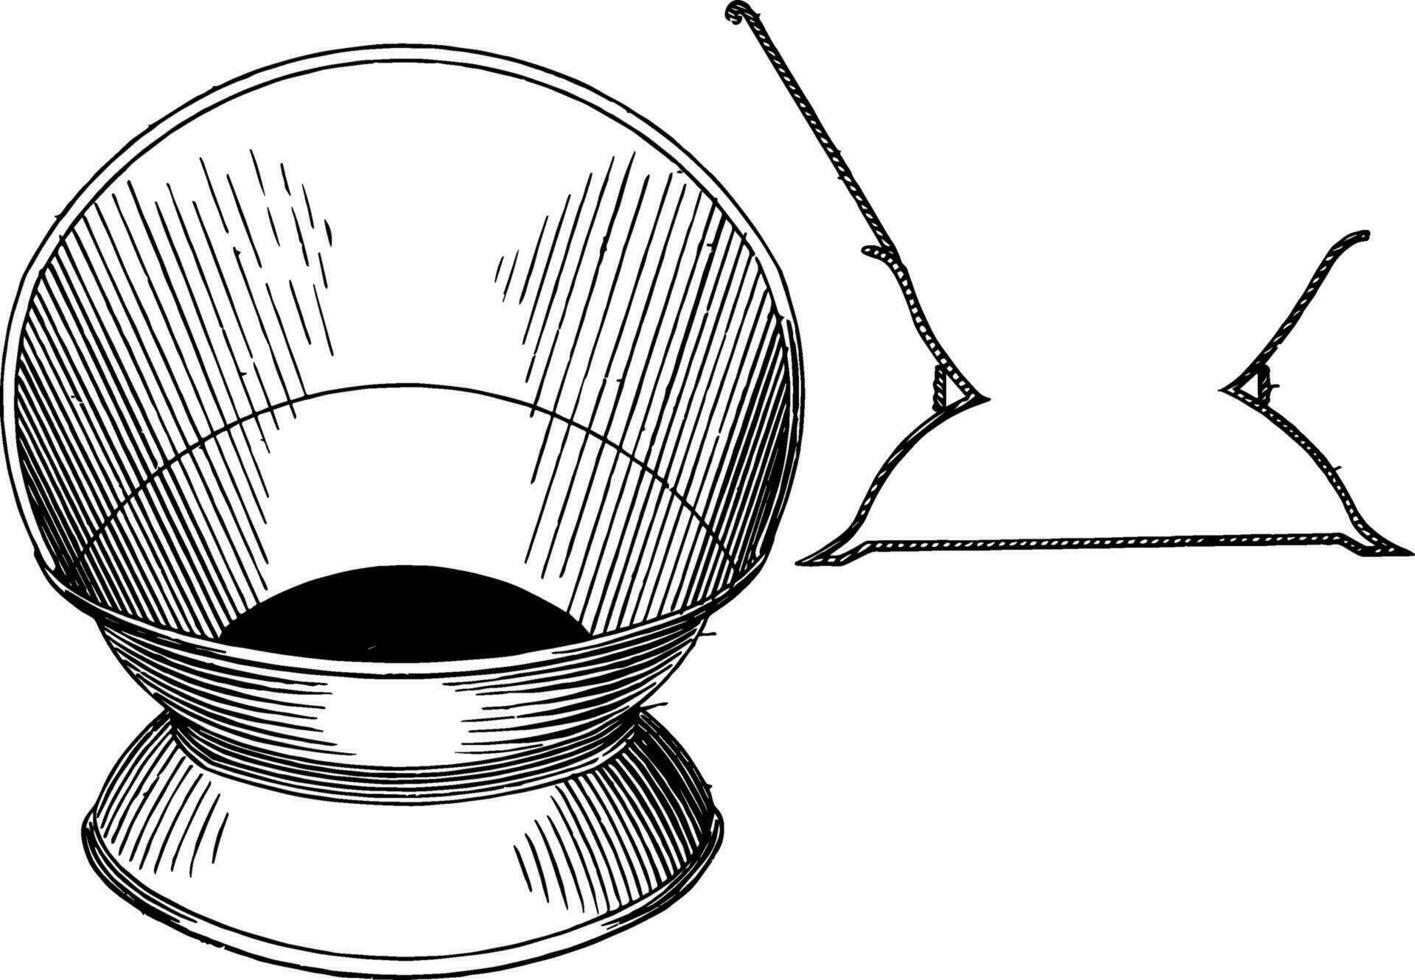 The Design for a Cuspidor is a receptacle made for spitting vintage engraving. vector